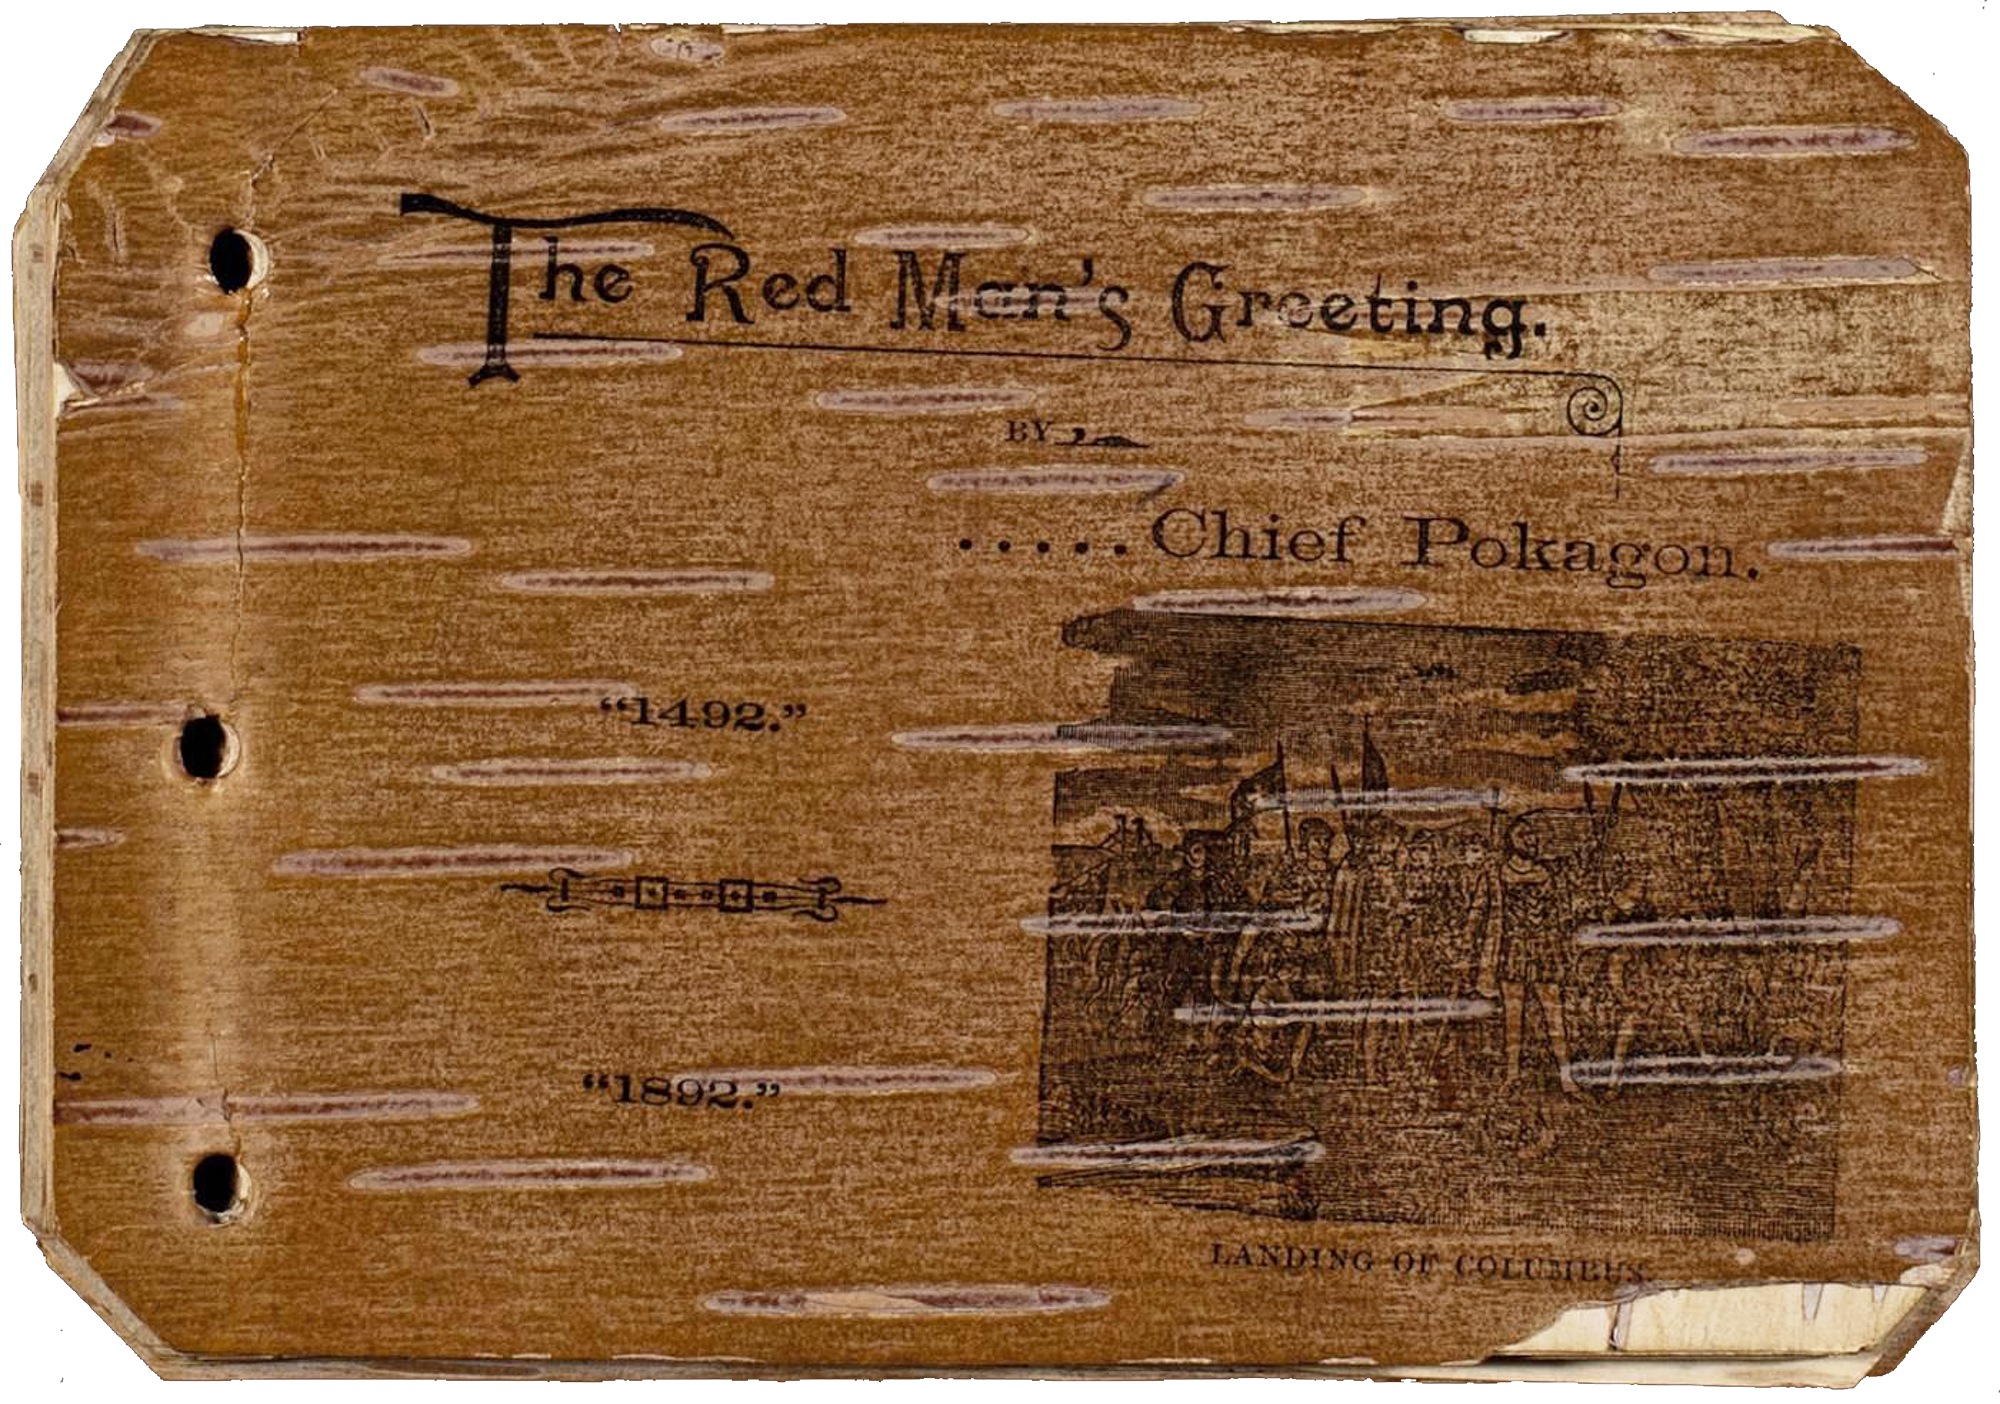 Simon Pokagon sold his birch bark booklet, “The Red Man’s Greeting,” at the 1893 World’s Columbian Exposition. At the fair, he delivered a speech arguing that America needed to make room for Native Americans as part of the American Dream. (The Red Man&#39;s greeting, 1492-1892, by Chief Pokagon, c1893. Call number: Ayer 251 .P651 P7 1893. Courtesy The Newberry Library, Chicago.)